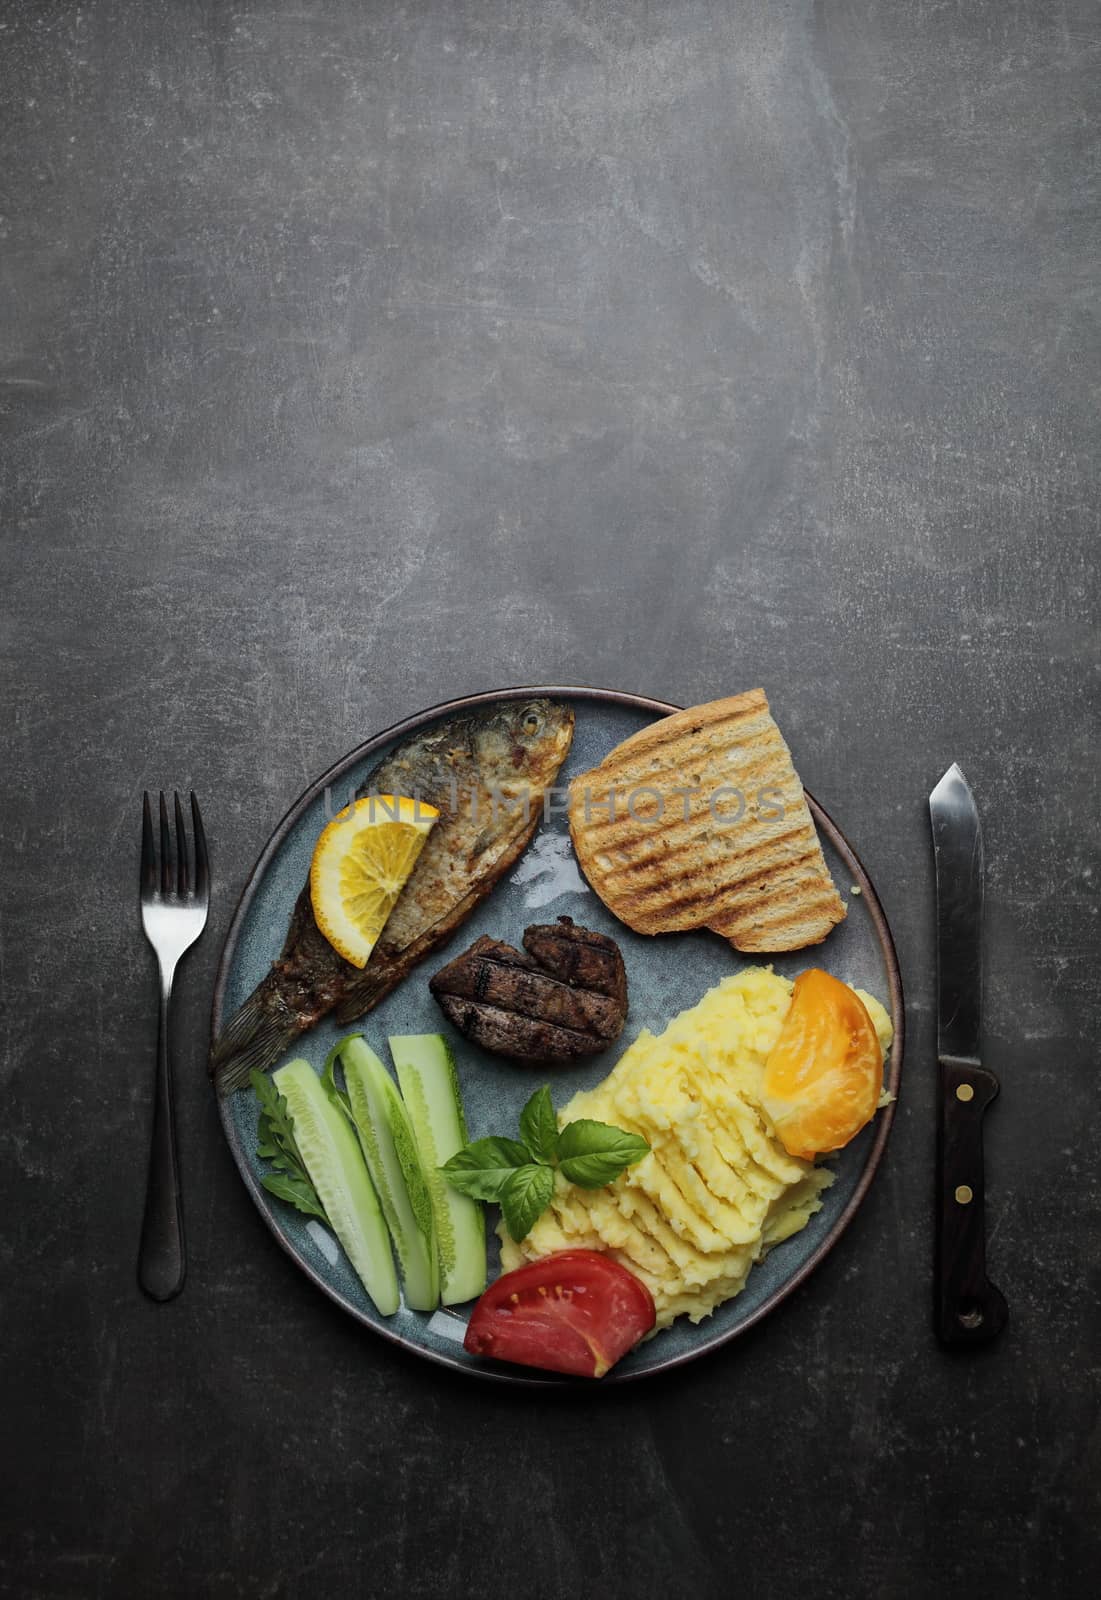 Fried fish, meat steak and vegetables on a plate. Concrete gray countertop by selinsmo